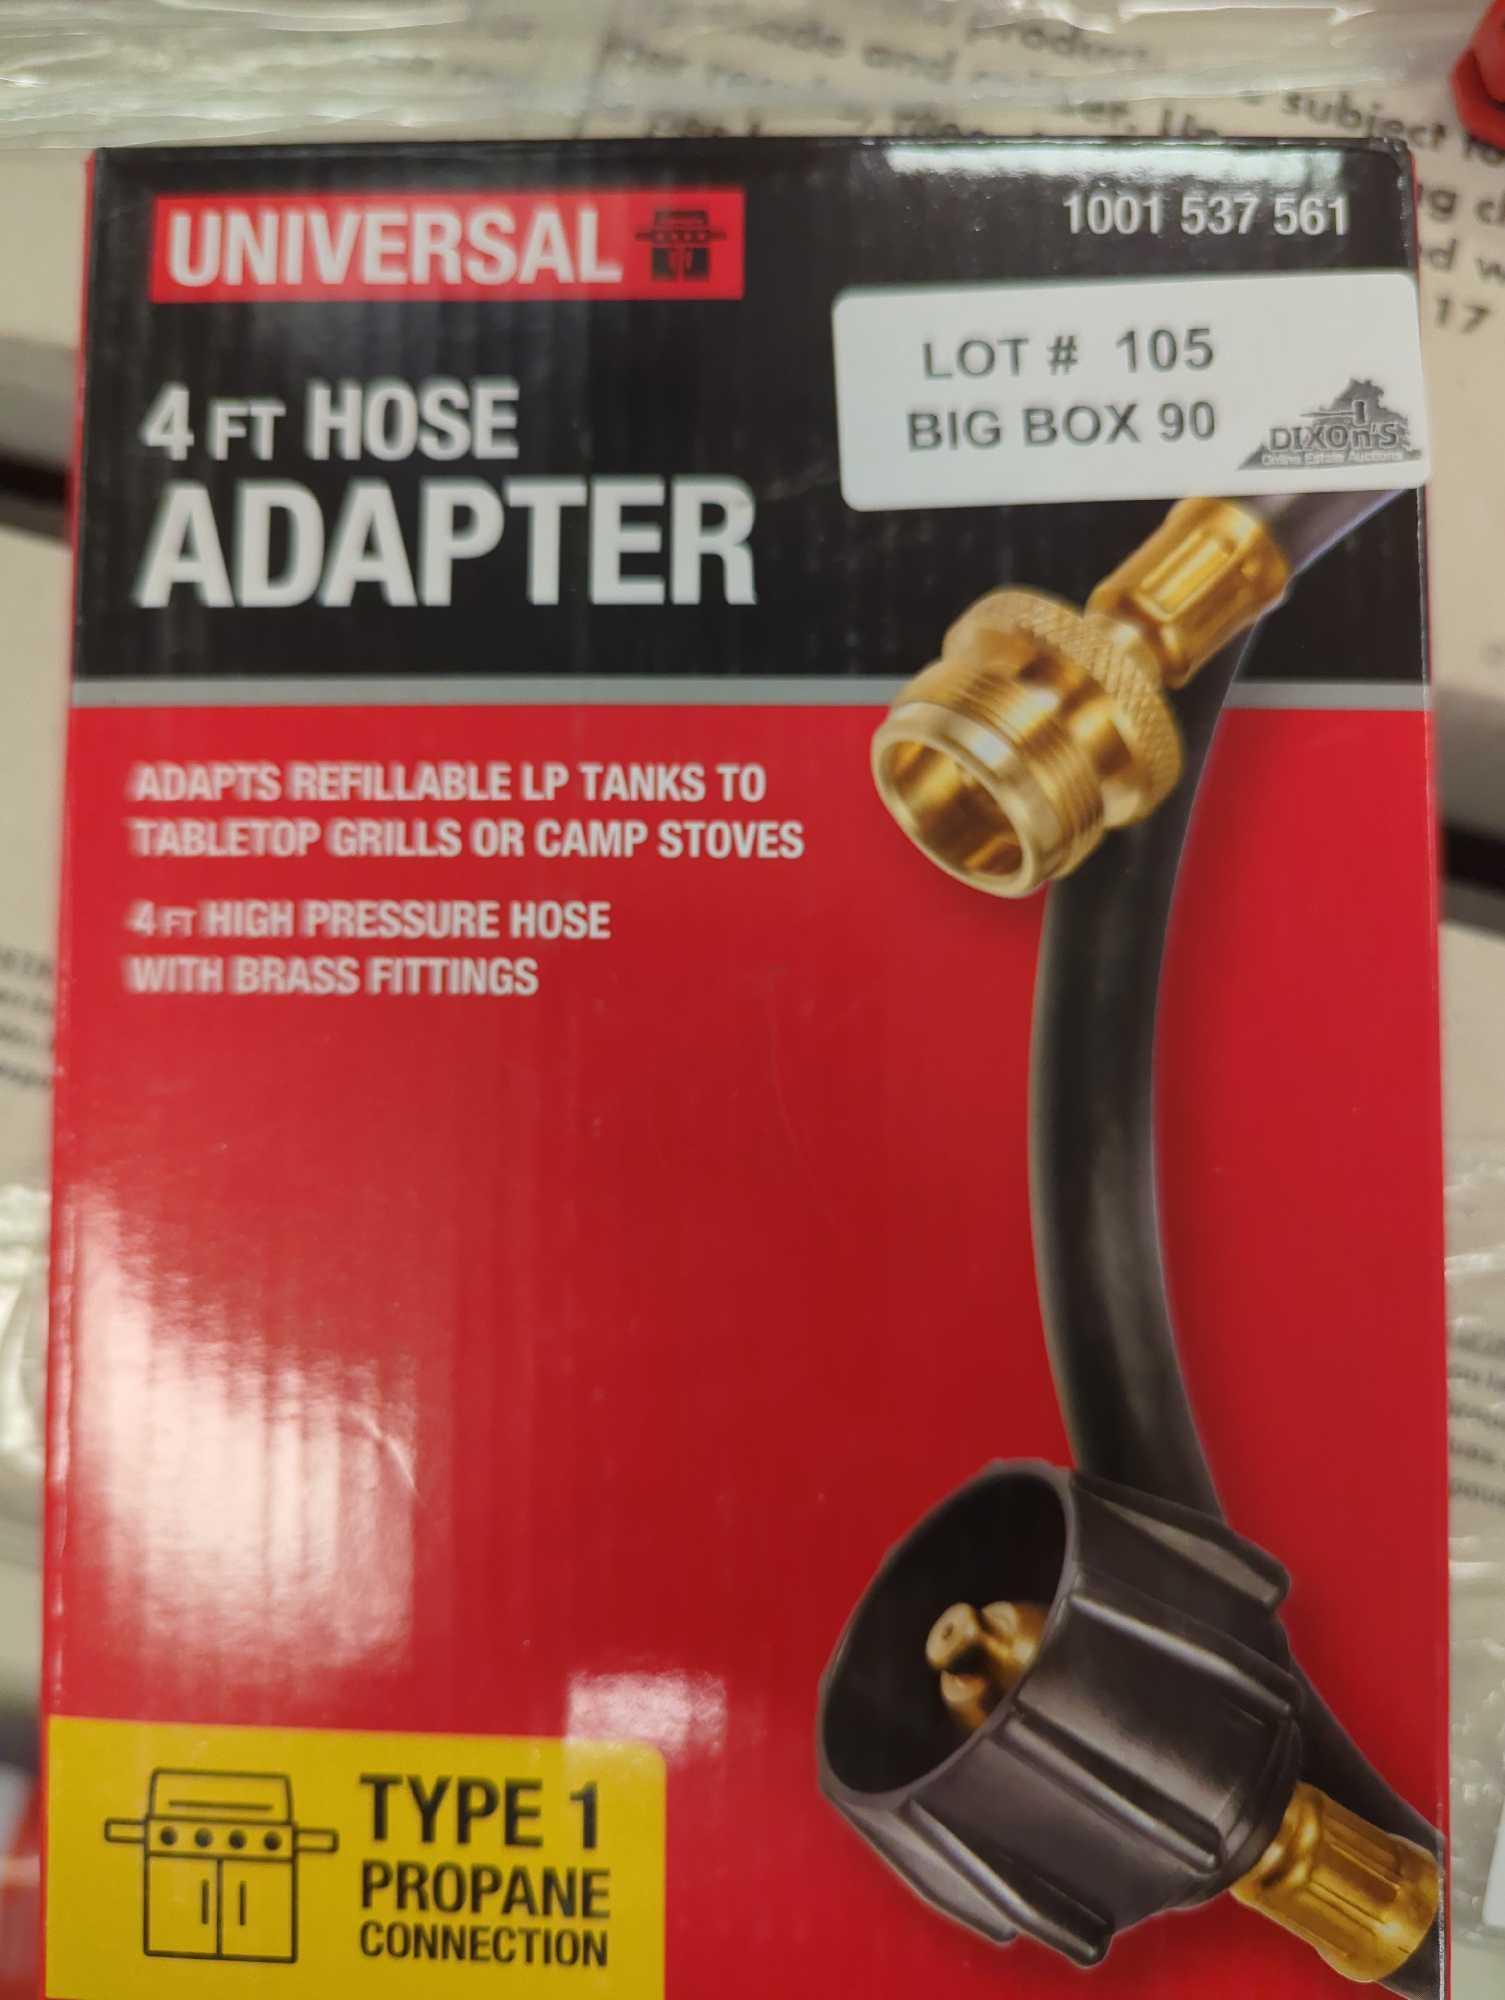 Universal 4 ft. Hose with Adaptor, Appears to be New in Factory Sealed Box Retail Price Value $23,